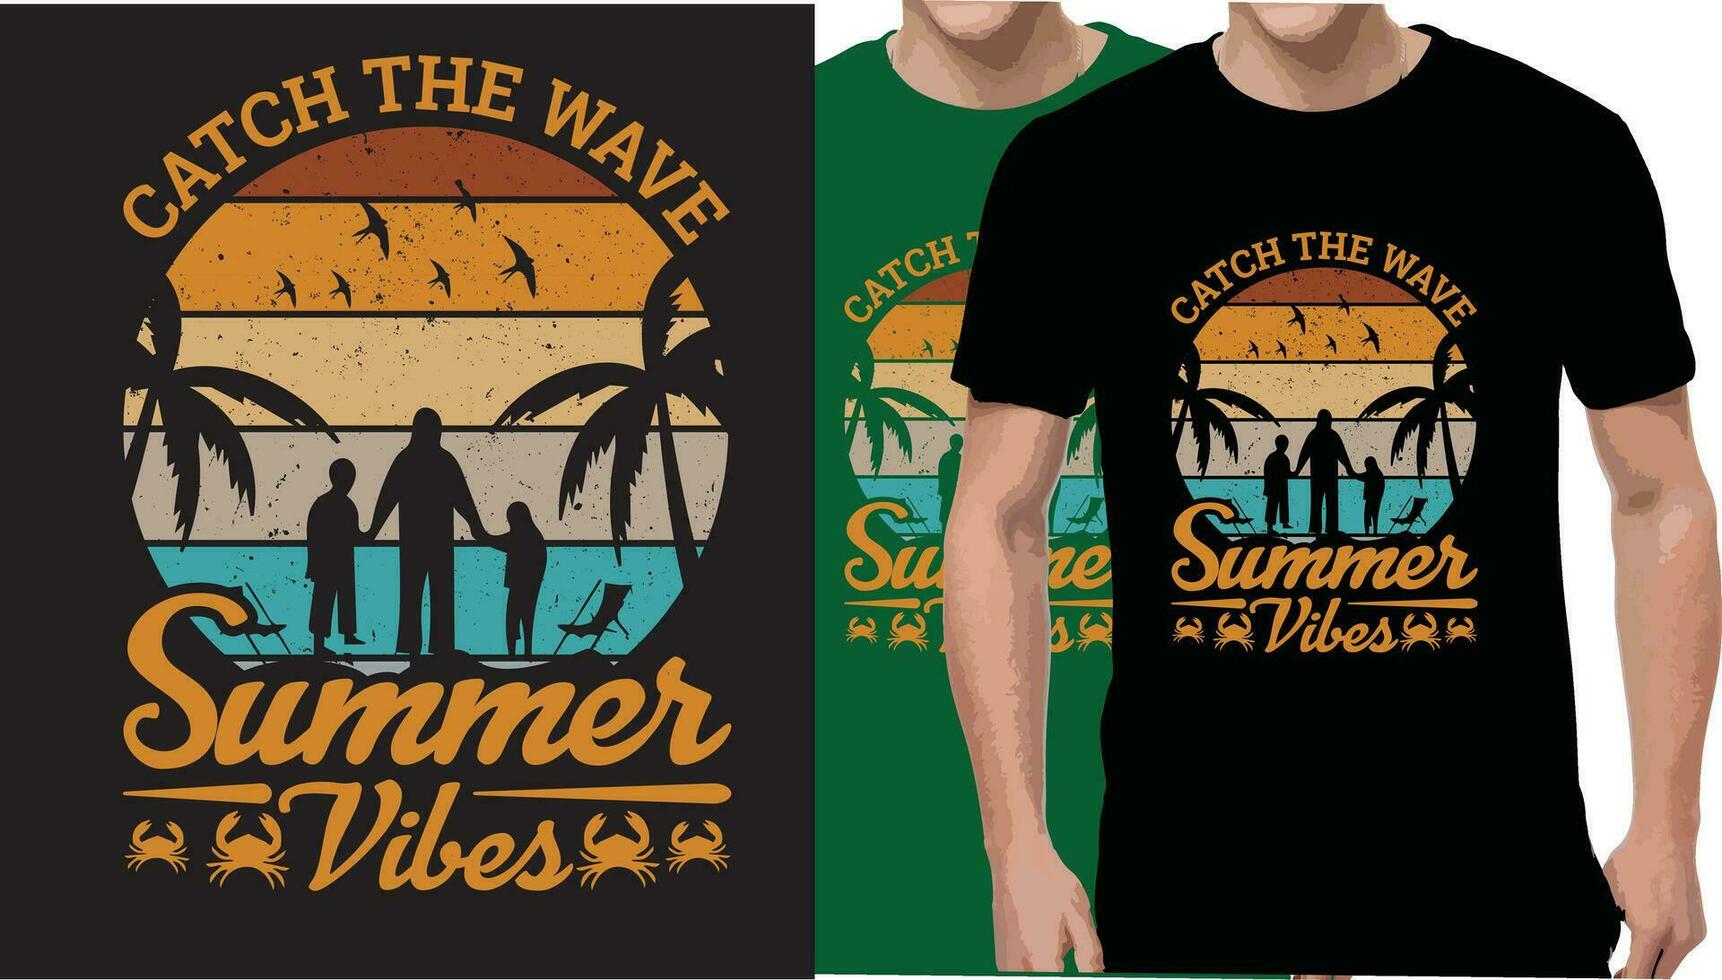 catch the wave summer vibes Inspiring t-shirt designs and quotes. Can be printed on t-shirts, mugs or other media. This package is packaged in a eps 10 file. vector